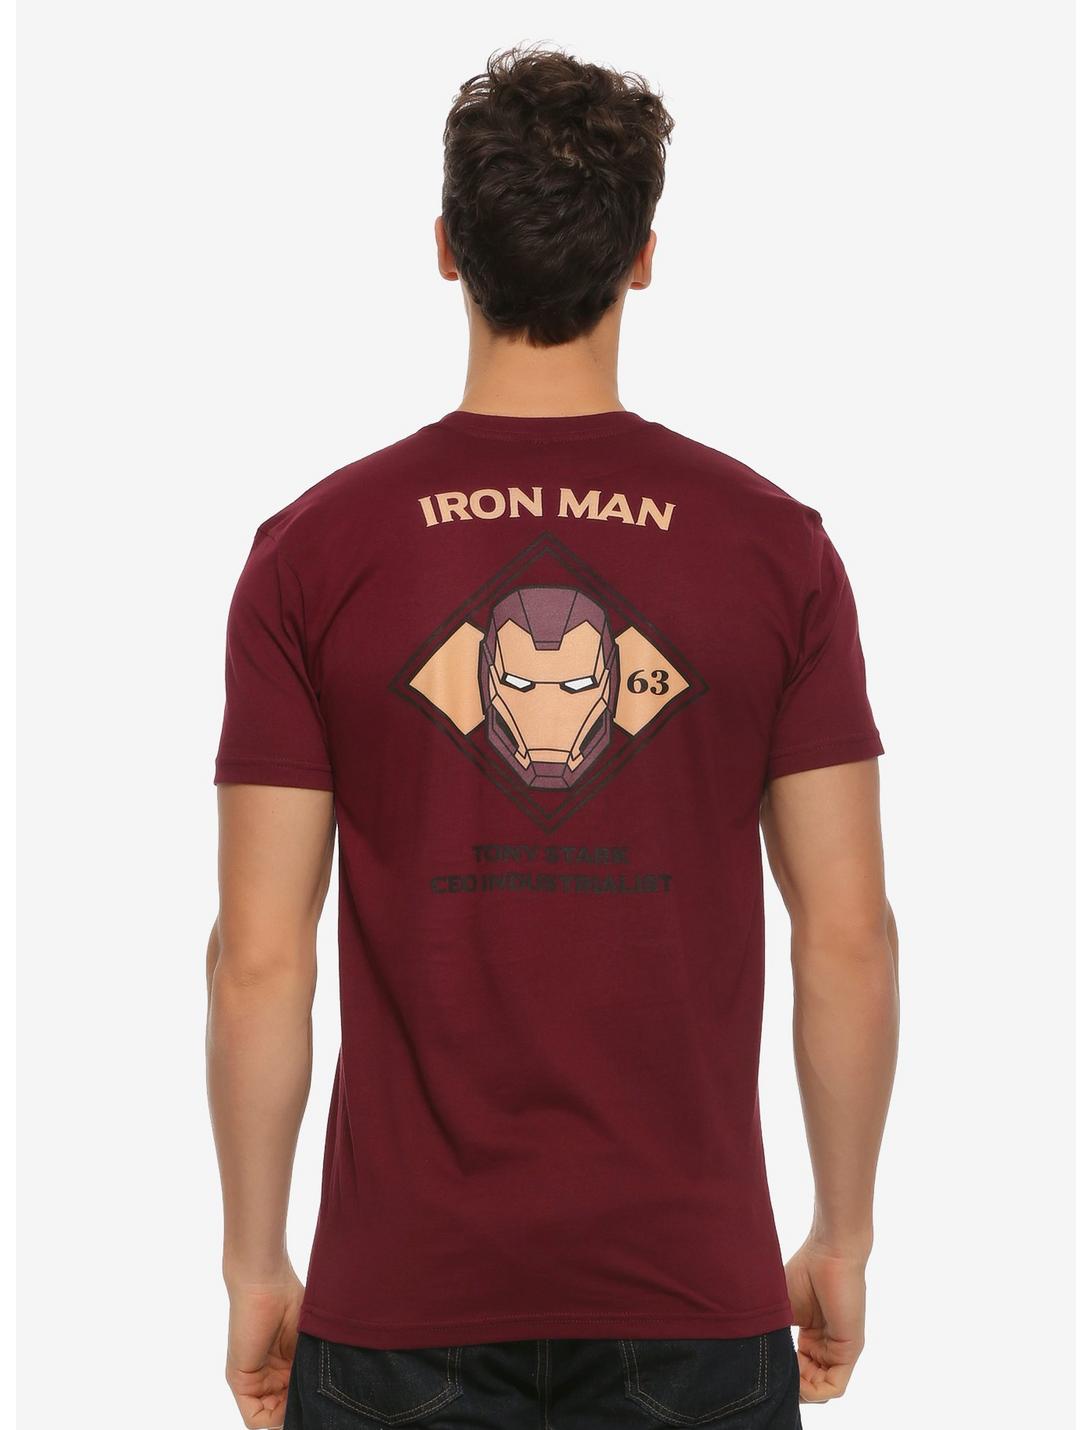 XXL Stark Industries Iron Man T-Shirt in 30 colours Super Hero Cool Gift S